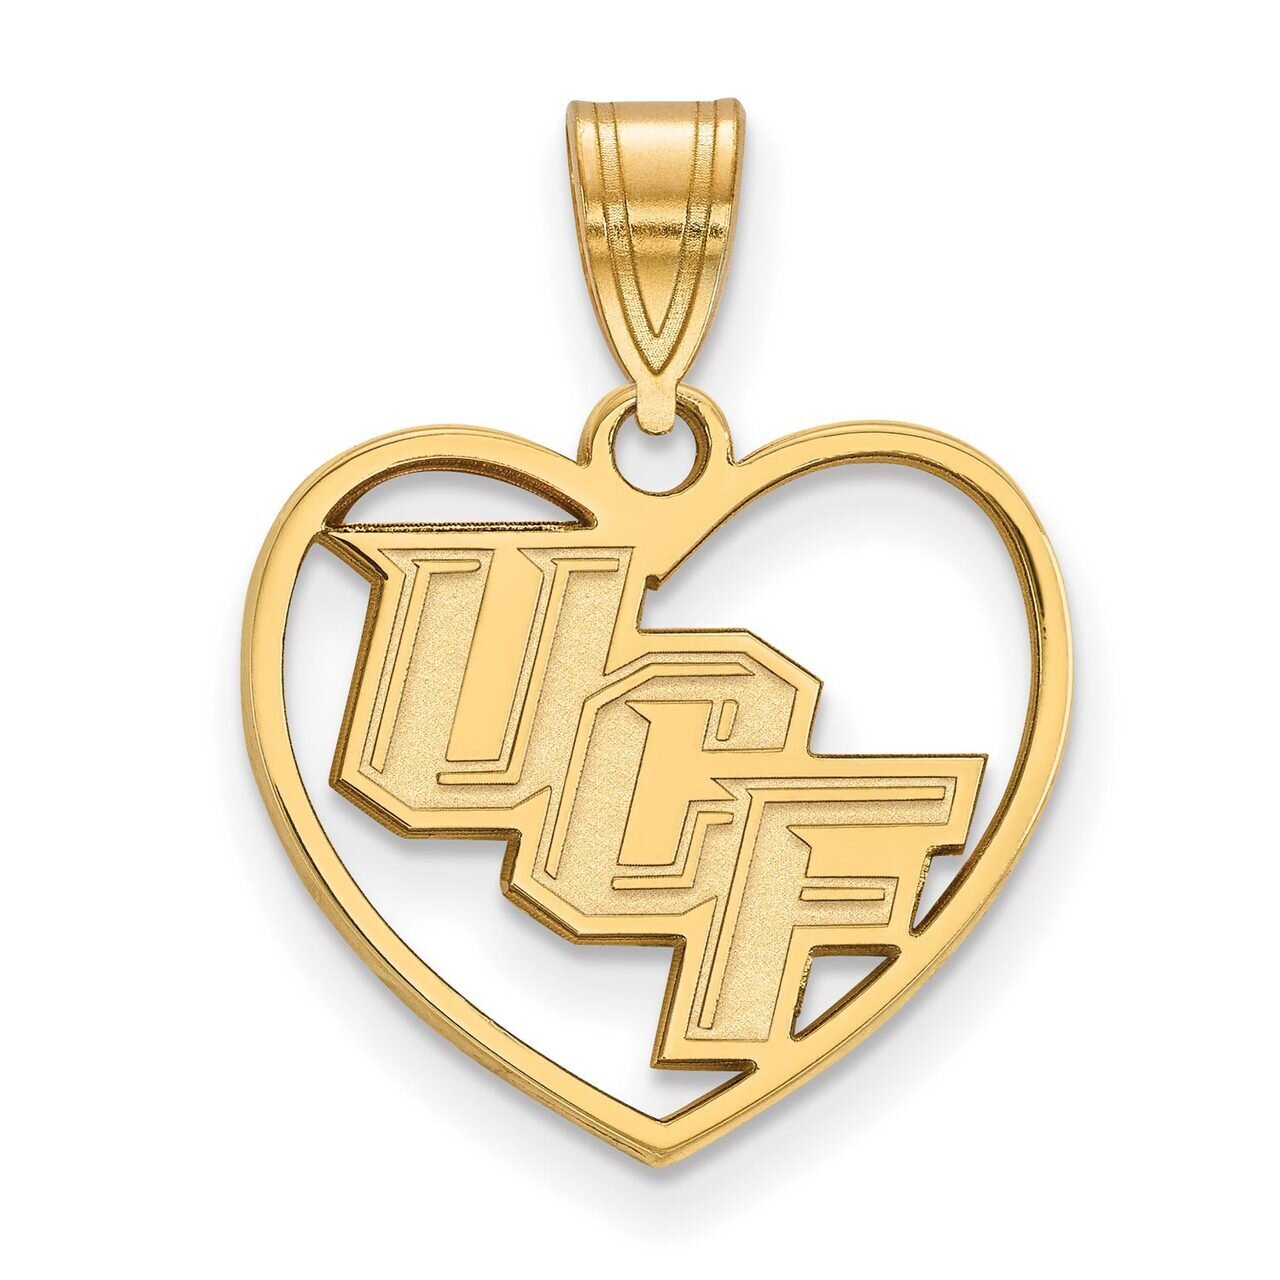 University of Central Florida Pendant in Heart Gold-plated Silver GP013UCF